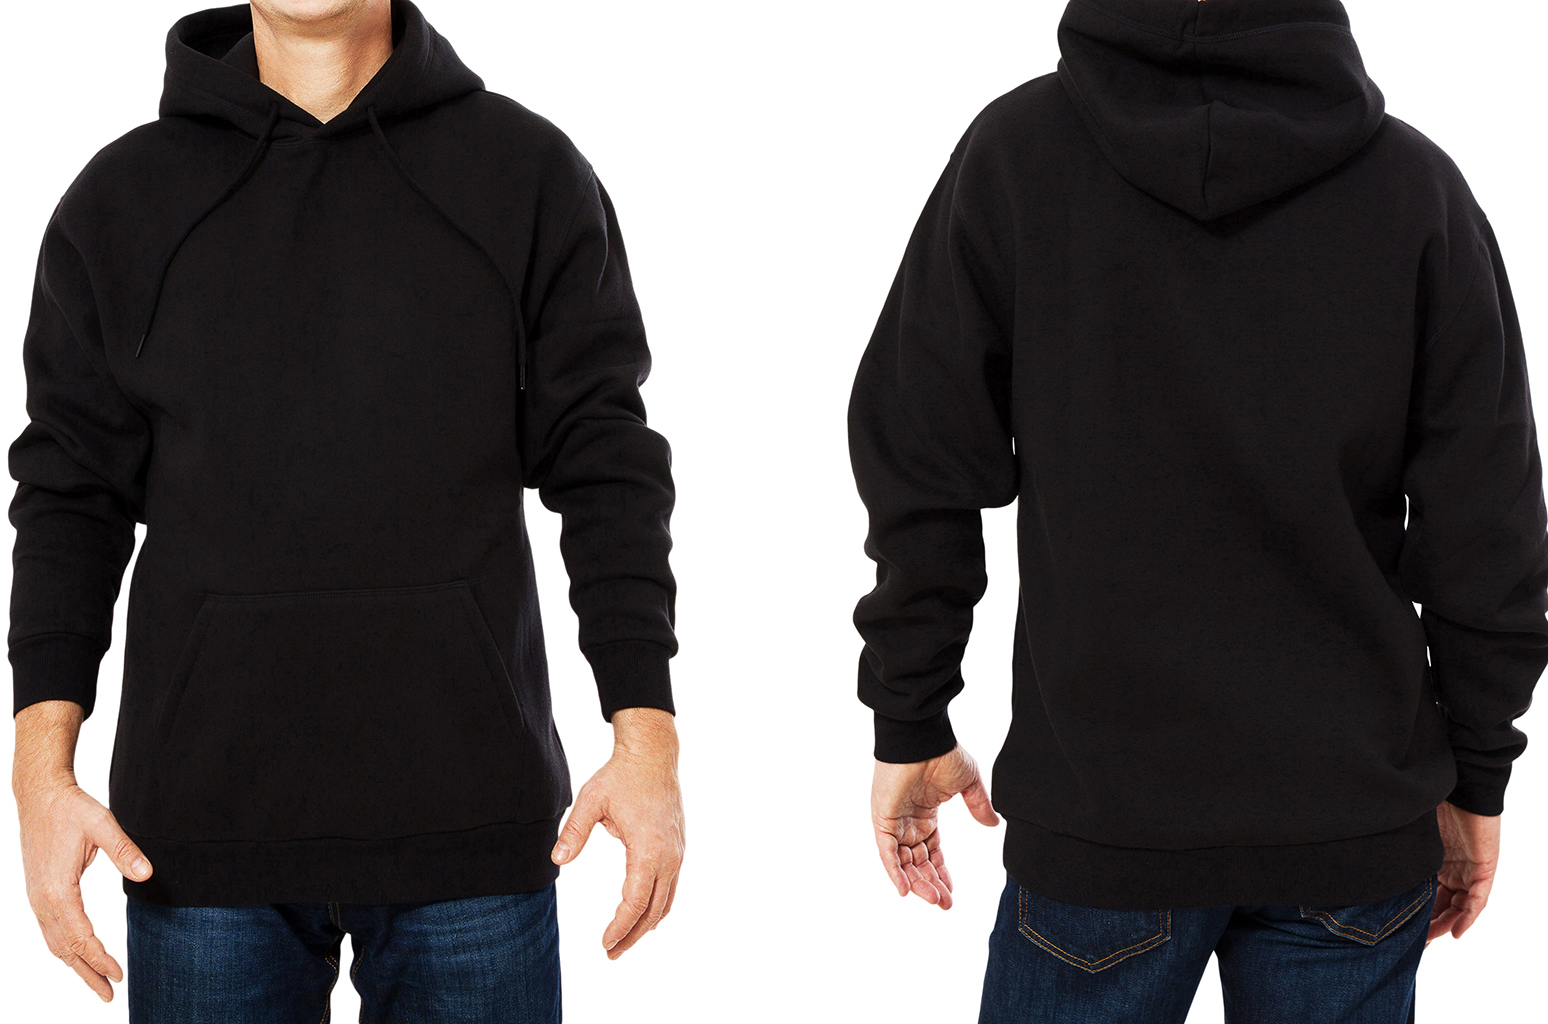 Layer Up: Men's Hoodies & Crewneck Sweatshirts Are On Sale for $14 ...